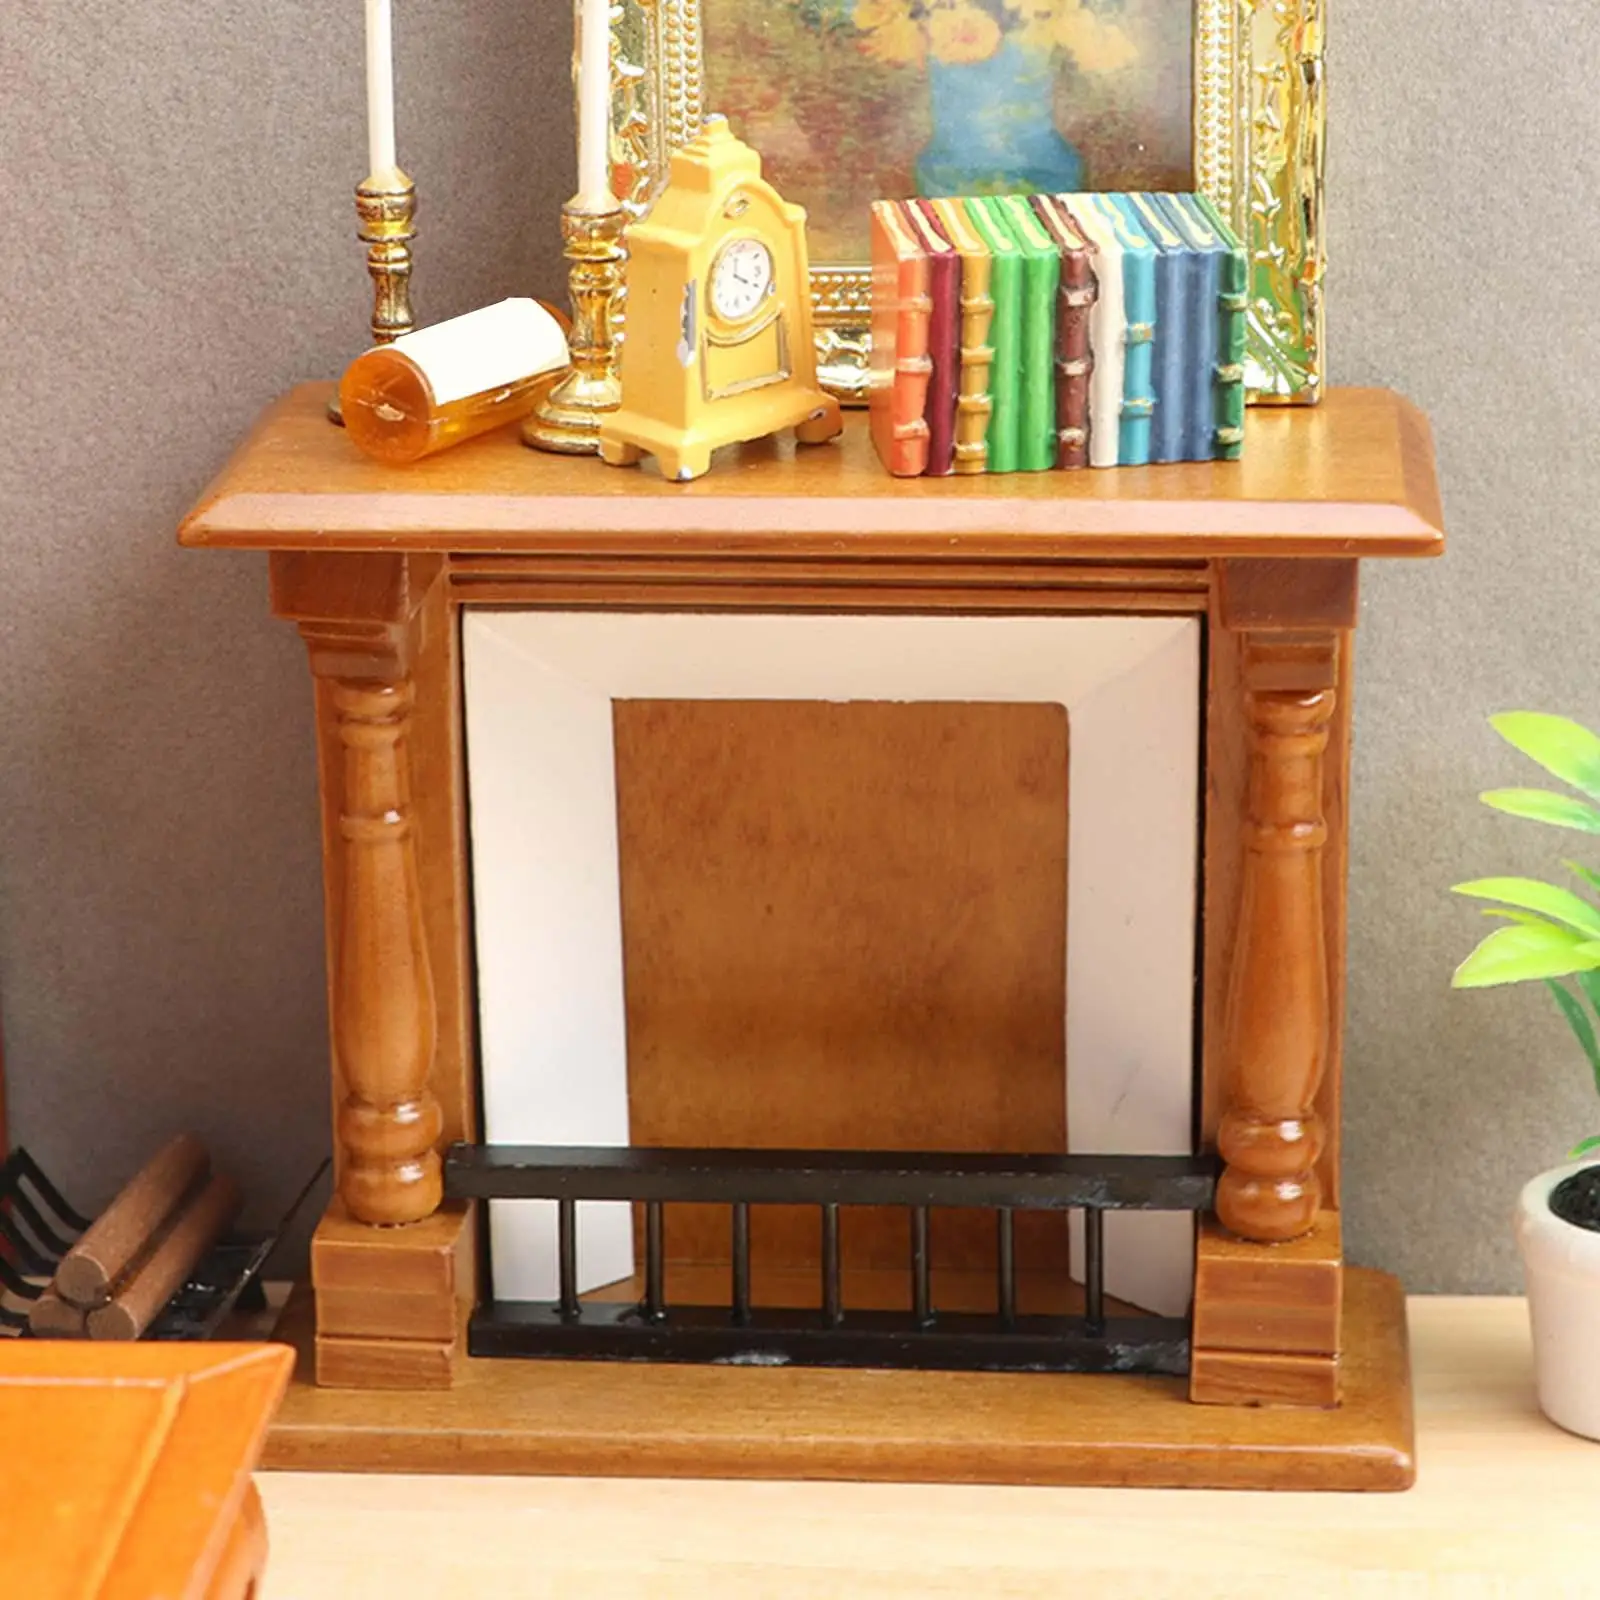 Mini Dollhouse Furnishings Ornament Wooden TV Stand 1/12 Fireplace for Dollhouses Pretend Play Toys DIY Accessories